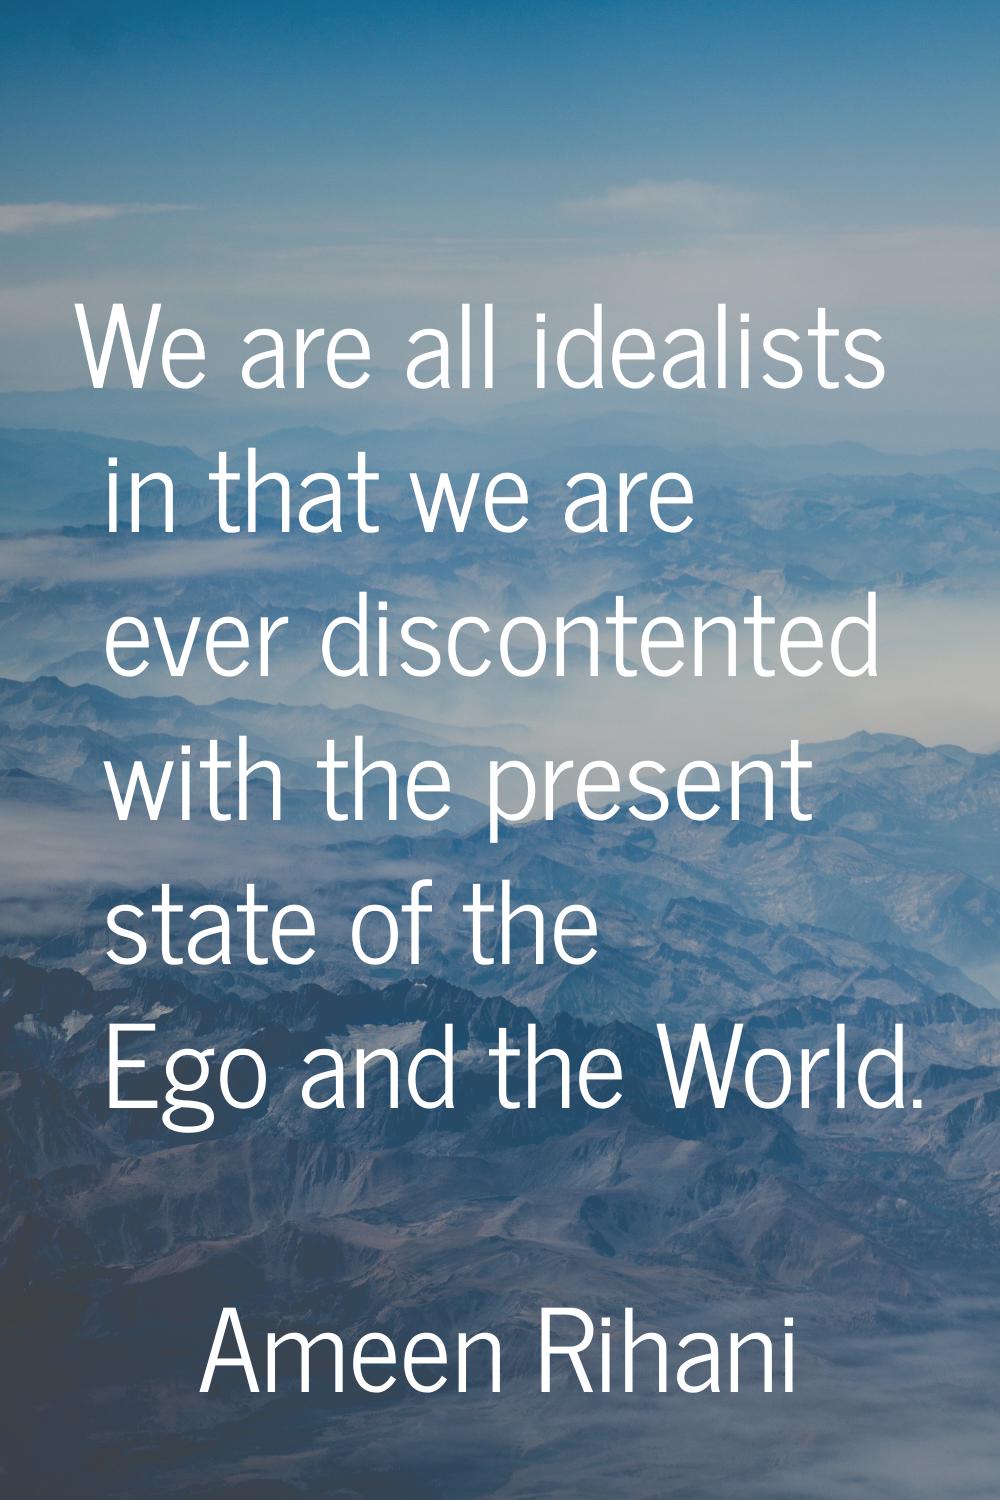 We are all idealists in that we are ever discontented with the present state of the Ego and the Wor